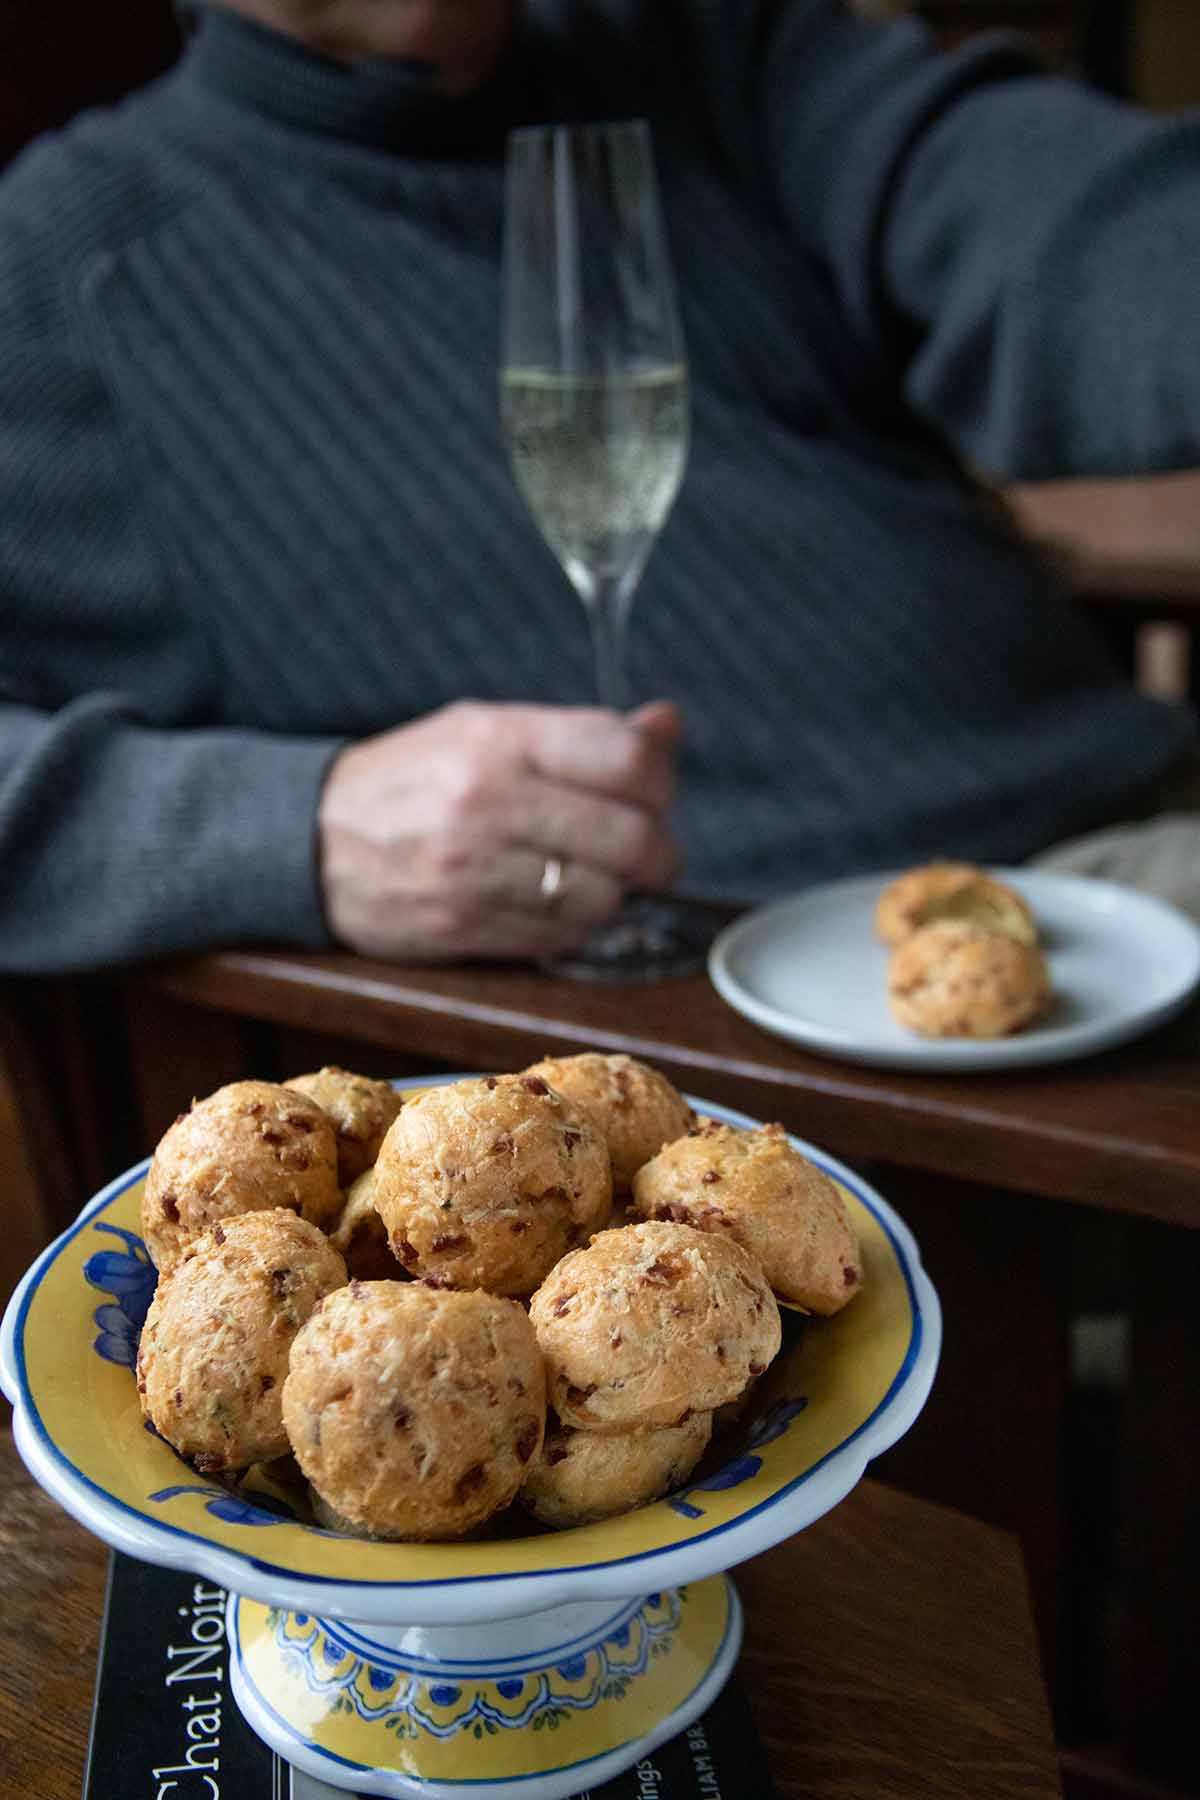 A man holding a glass of Prosecco with a plate of two gougeres and a dish filled with many gougeres beside him.